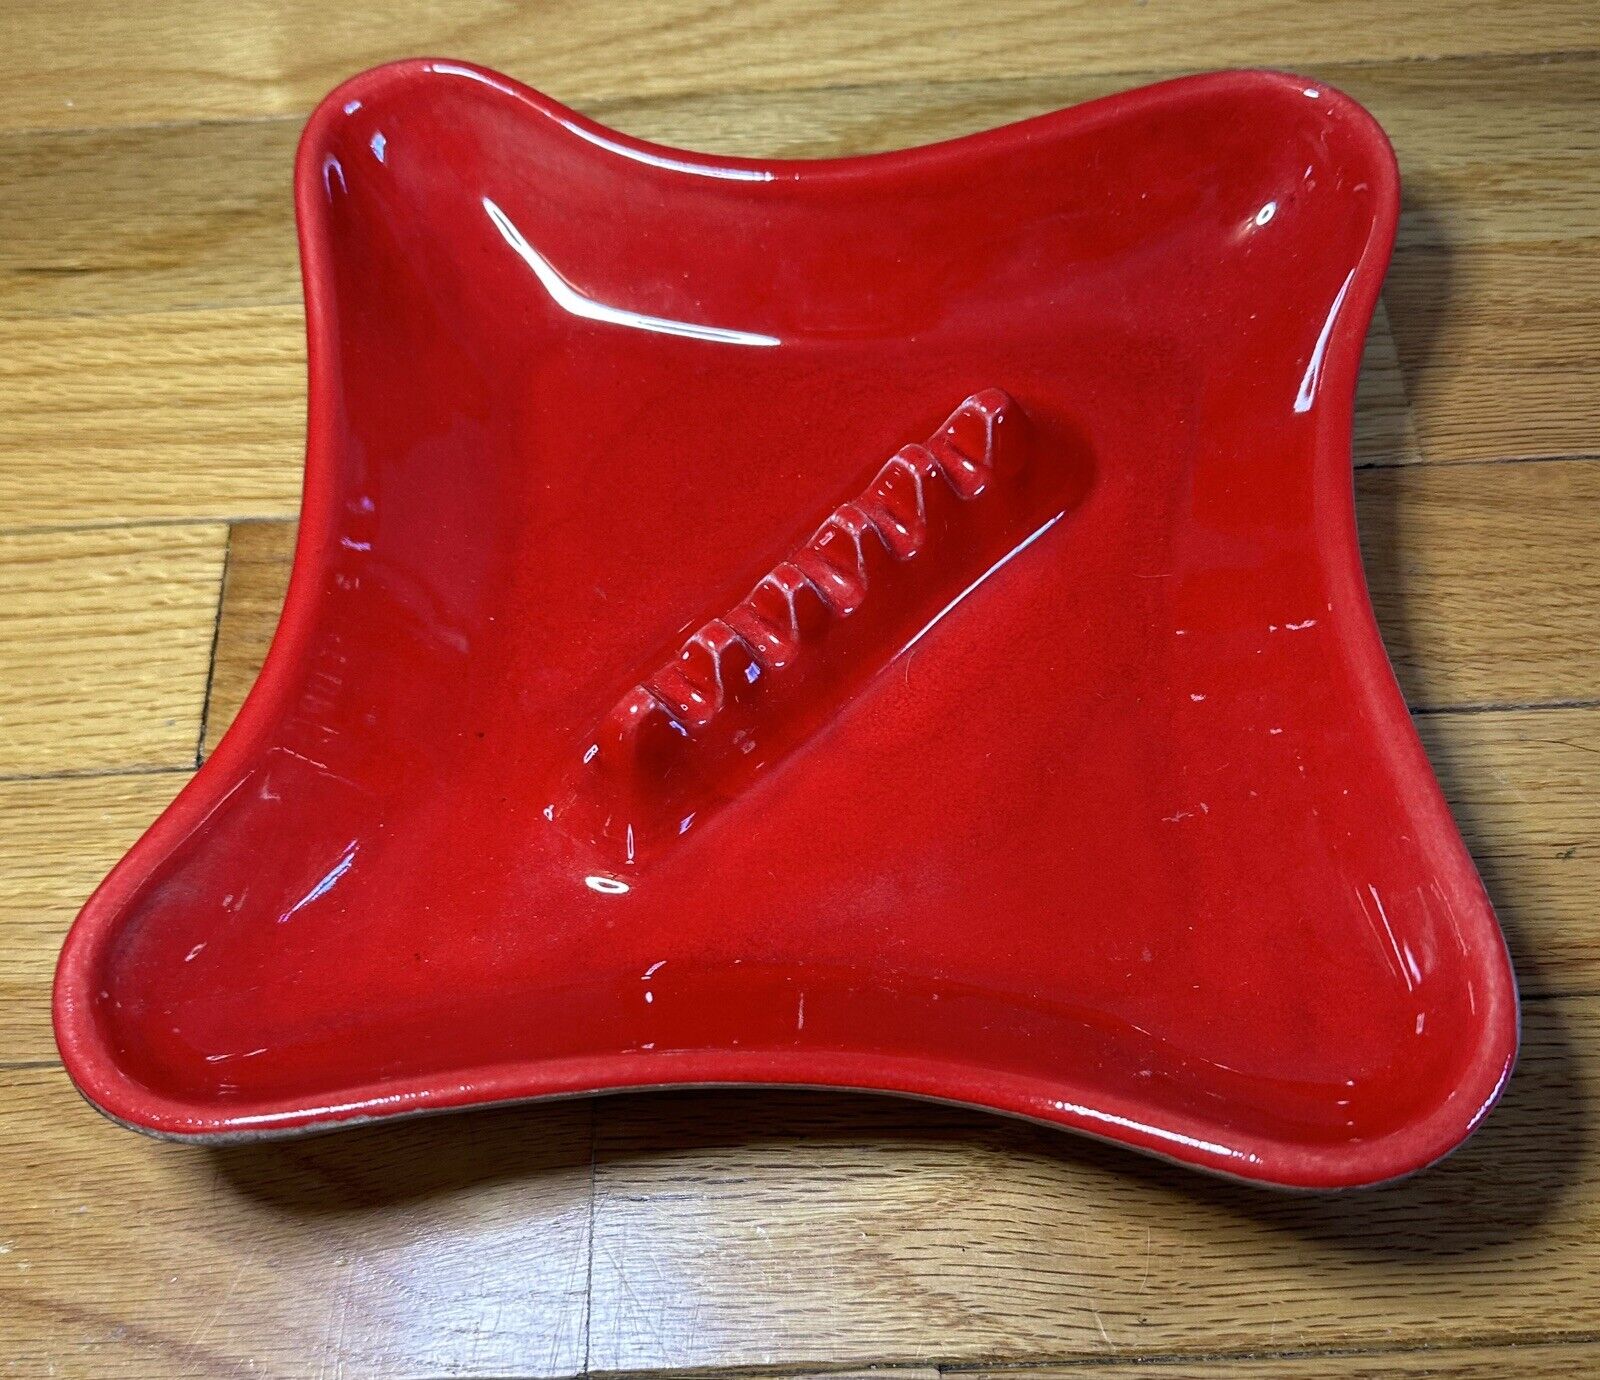 Vintage - Cherry Red Glazed Ashtray - Made In USA